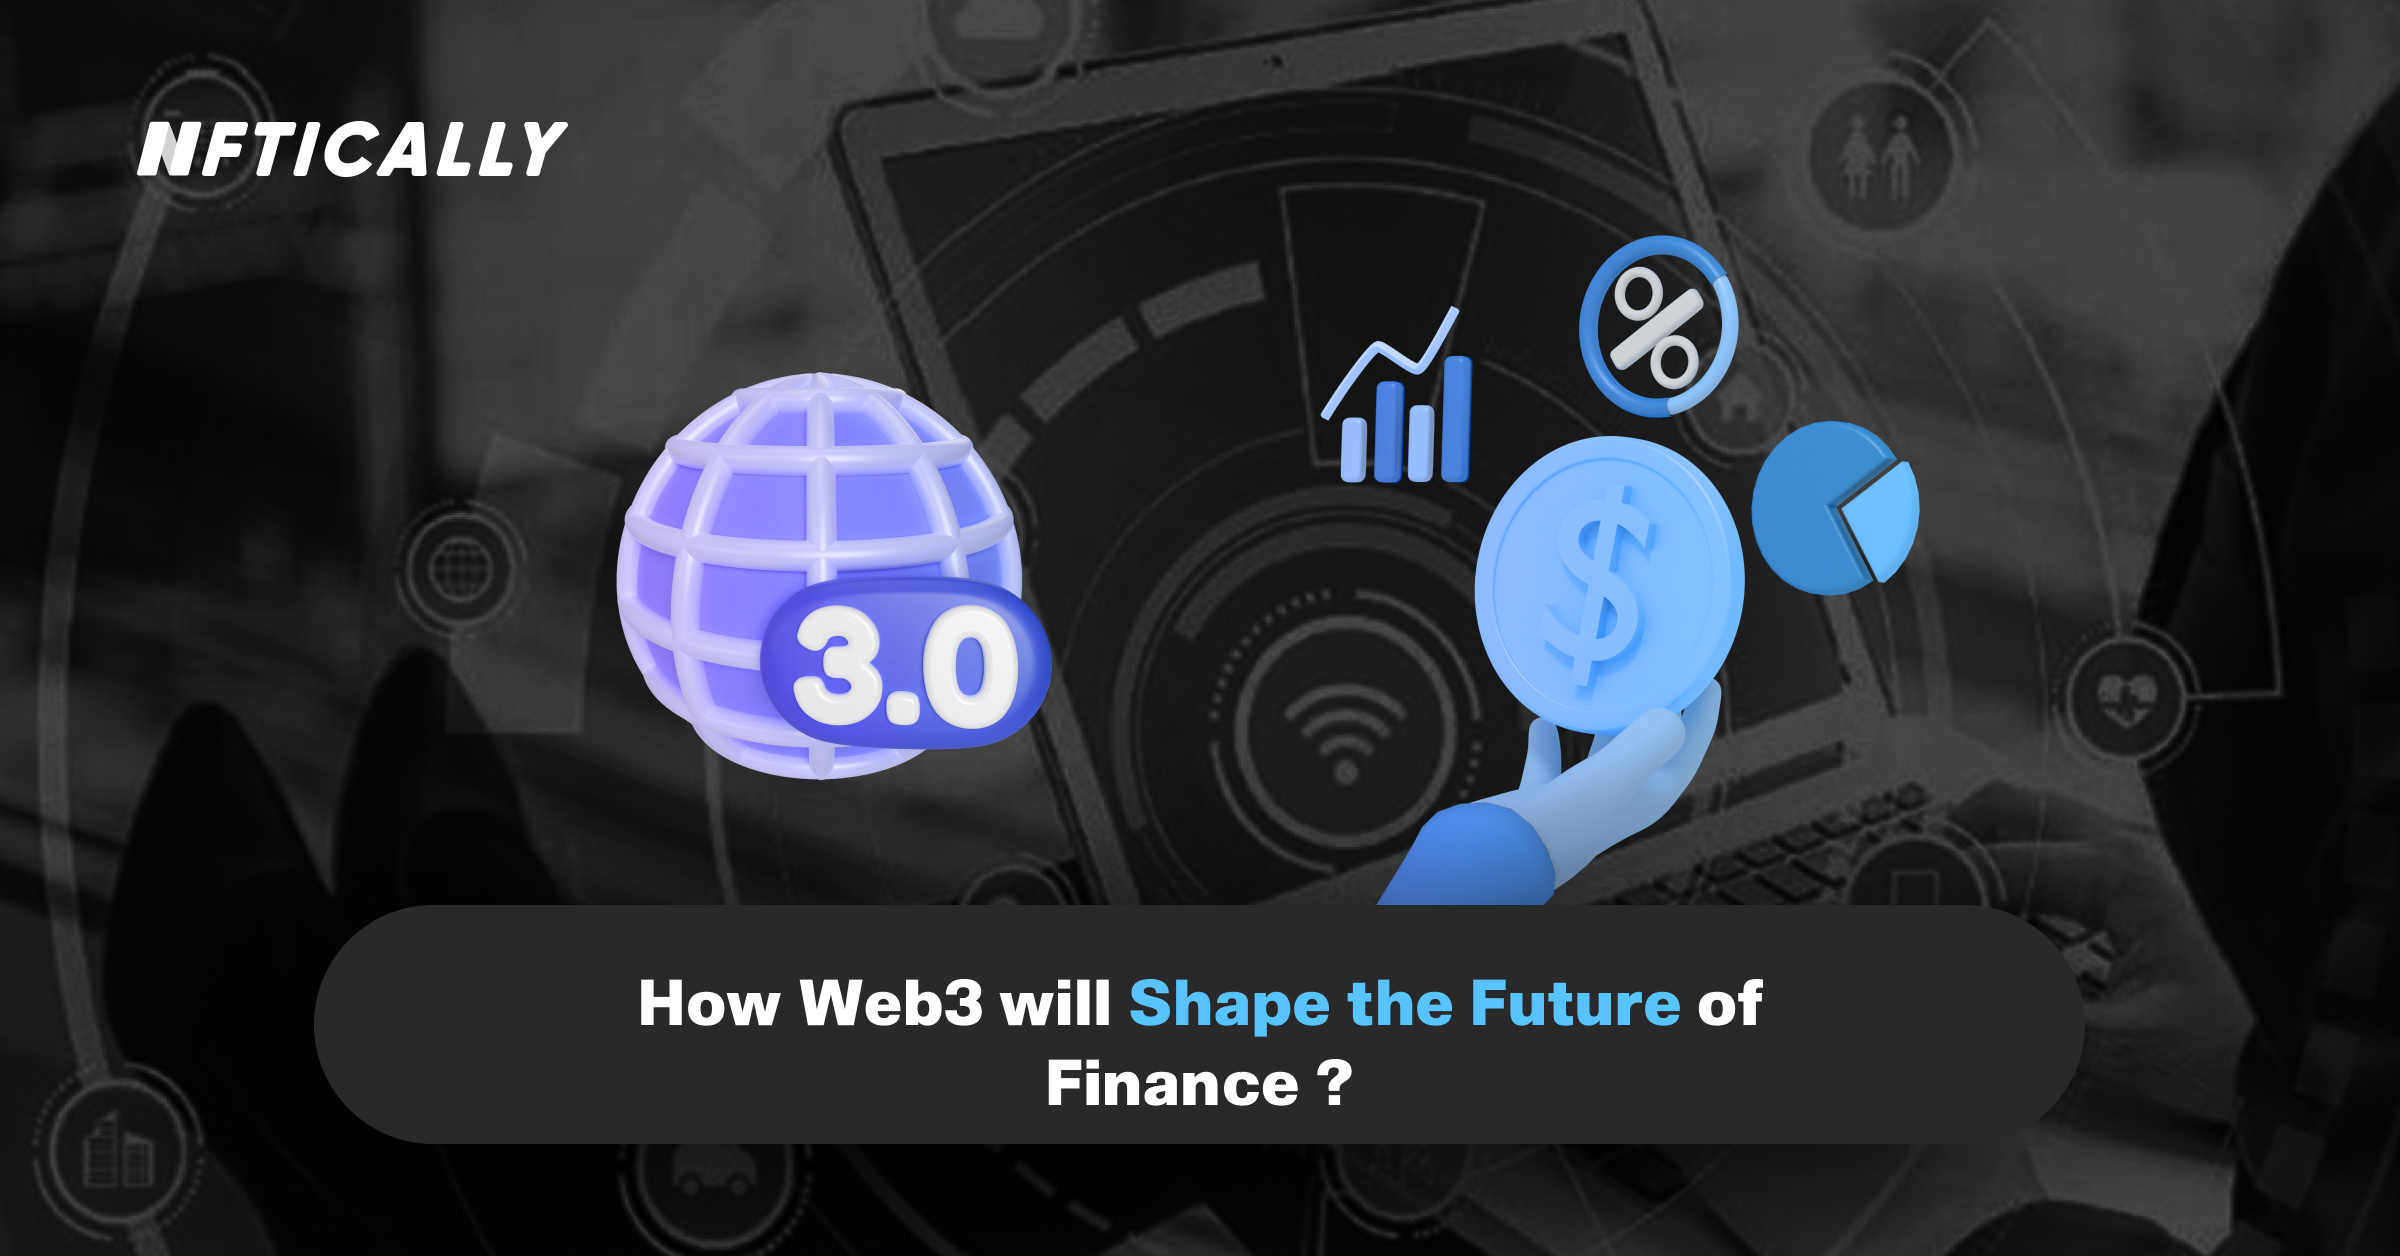 How Web3 will Shape the Future of Finance?